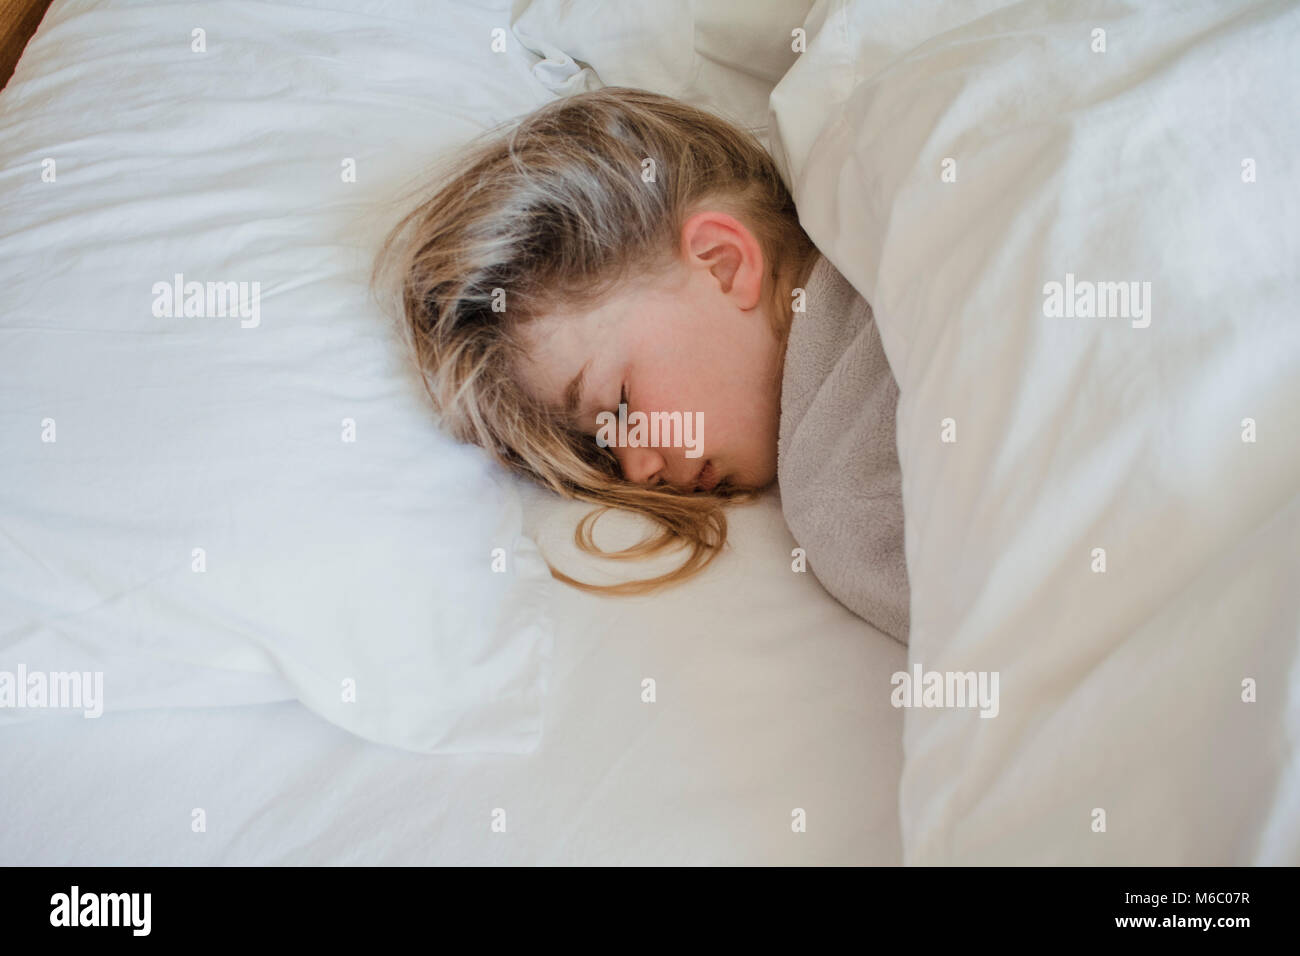 Little girl is fast asleep in bed. Stock Photo